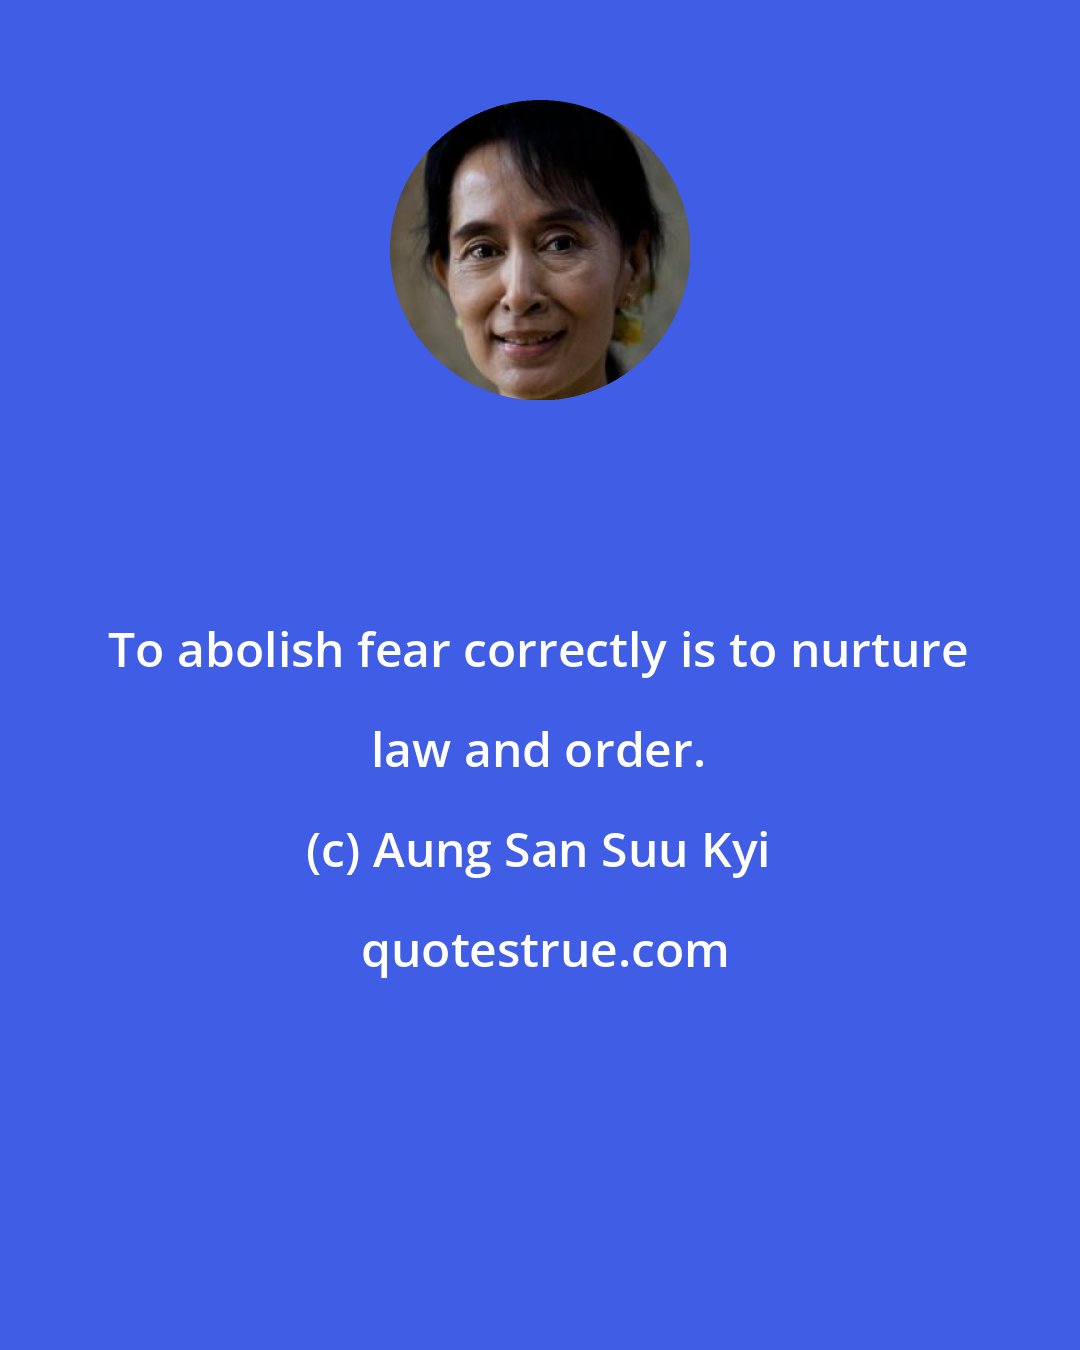 Aung San Suu Kyi: To abolish fear correctly is to nurture law and order.